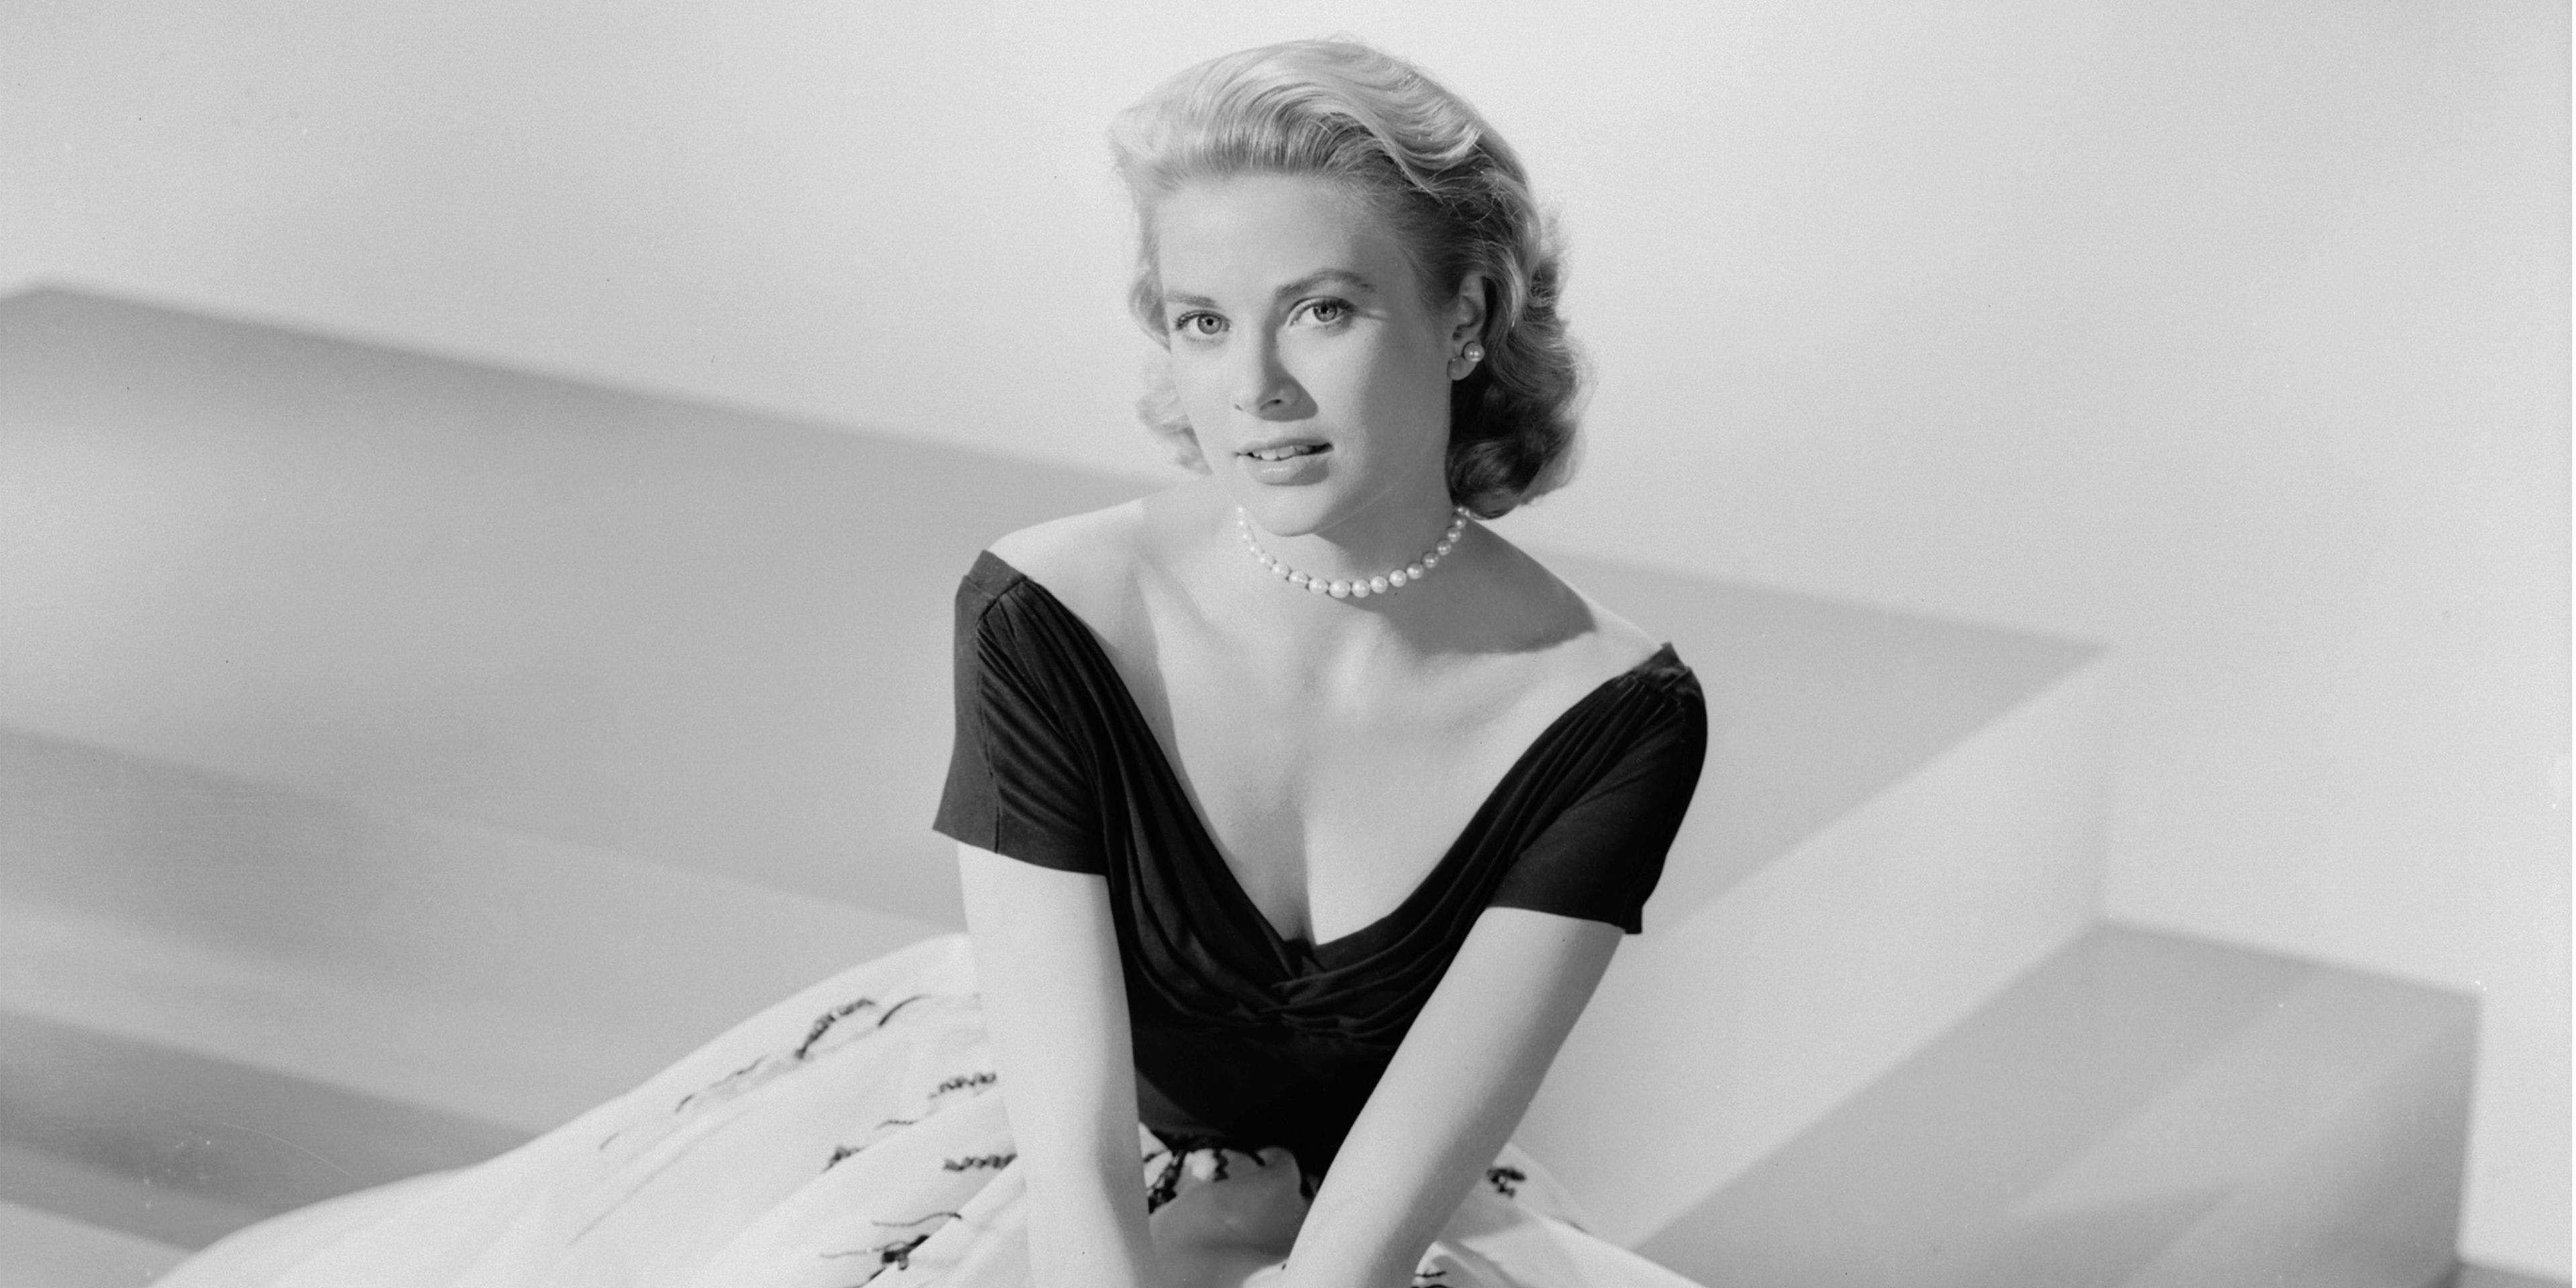 young grace kelly posing for a portrait wearing a black top and pearl necklace